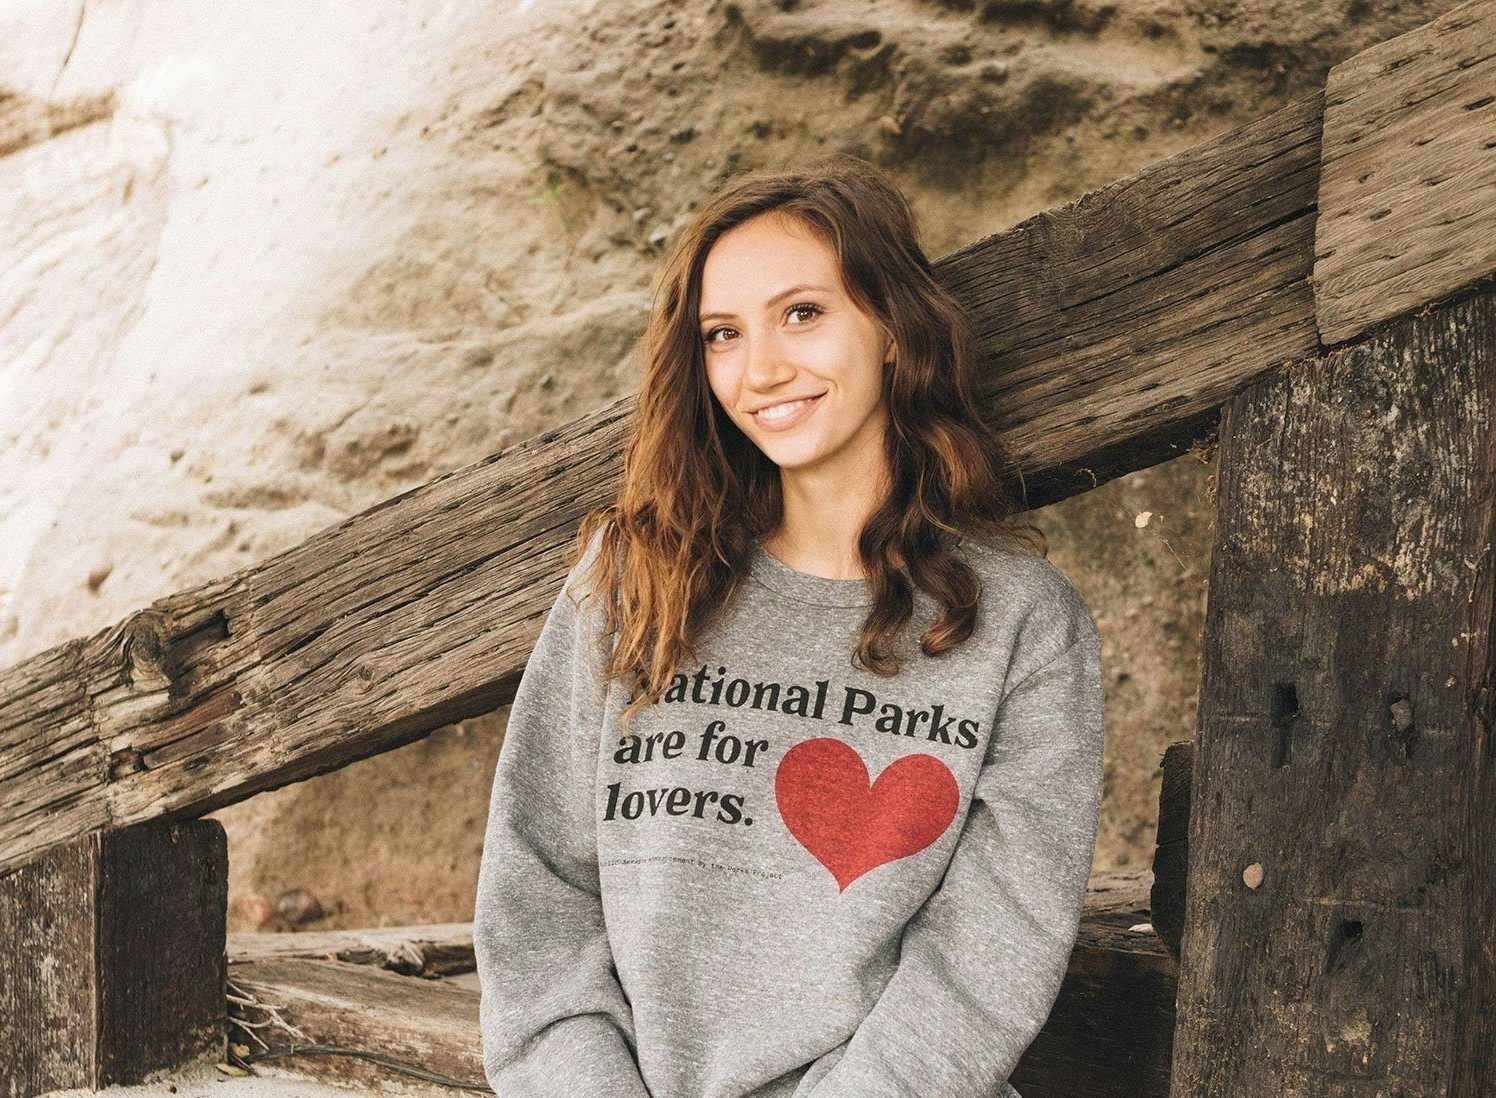 National-Parks-are-for-Lovers-Fleece-Sweatshirt-parks-project-2-e1538658493154